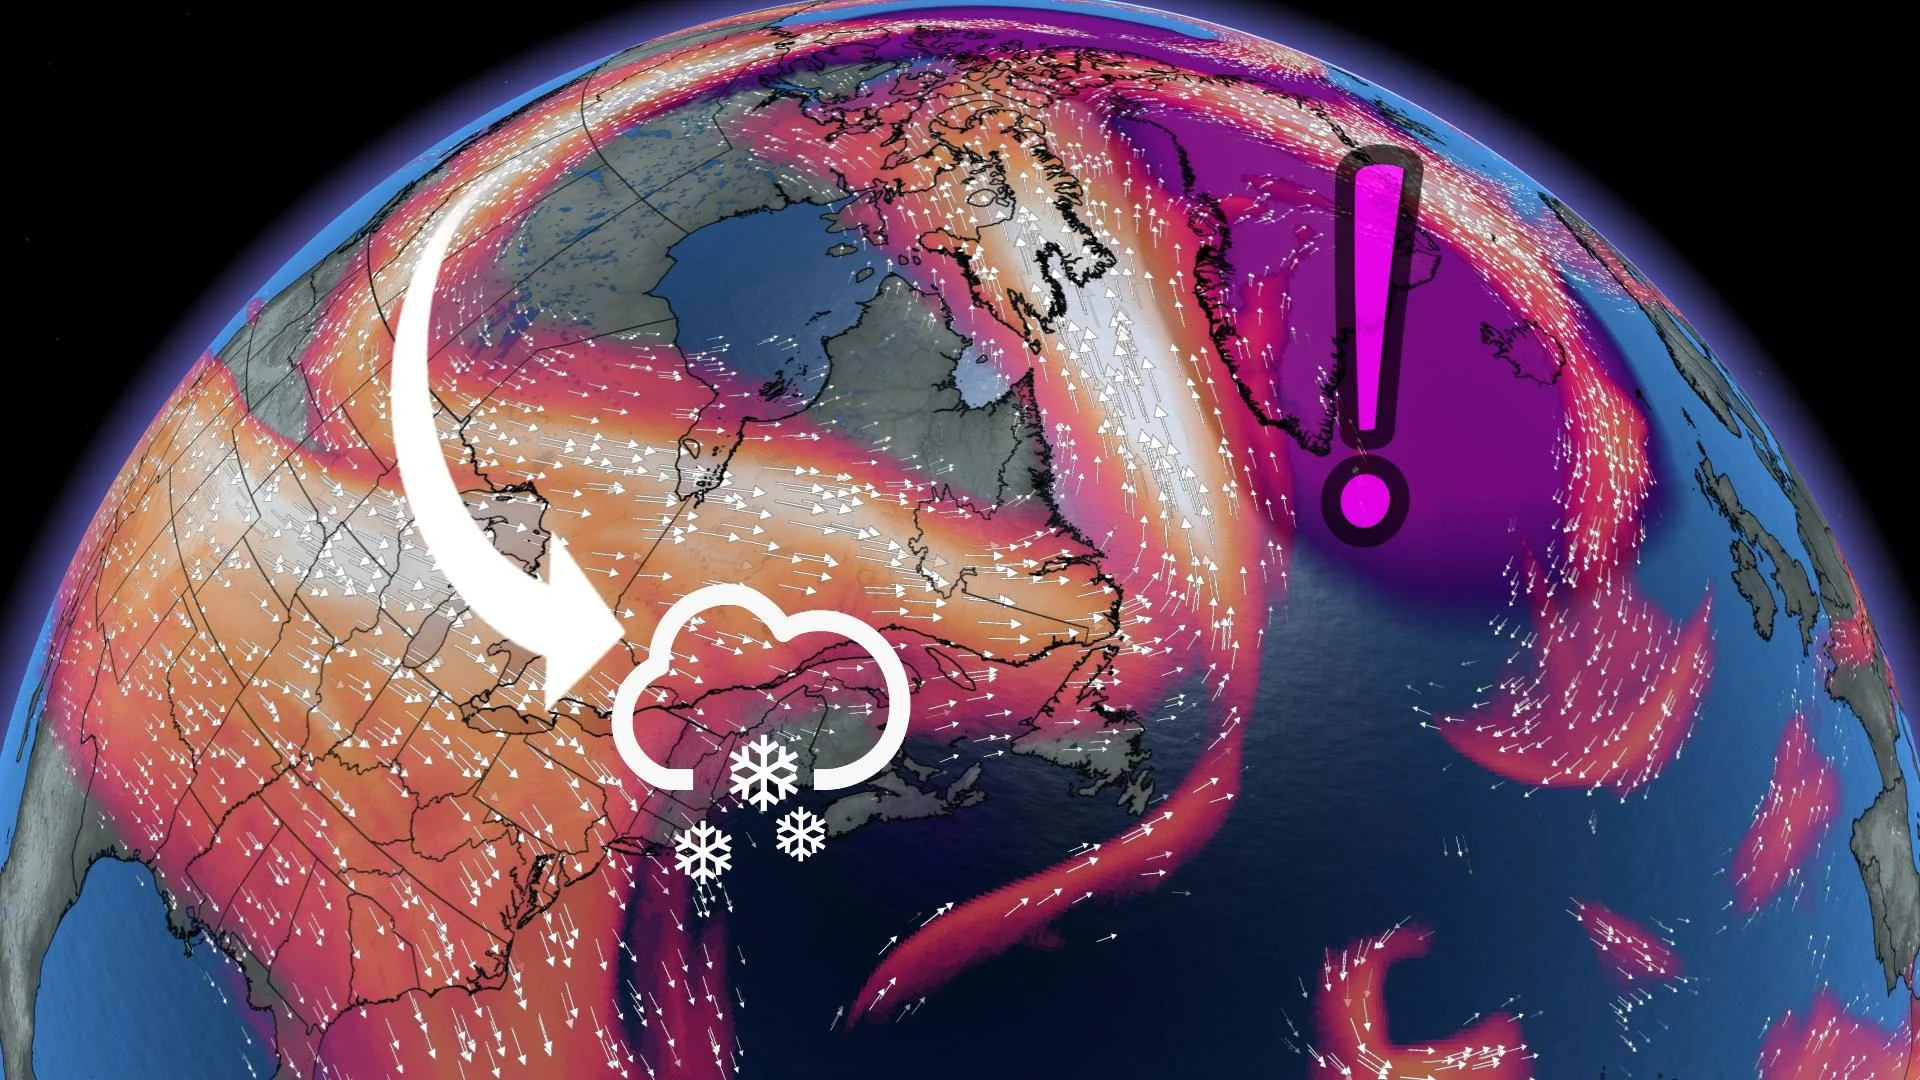 This mammoth ‘block’ could spell wintry trouble for Eastern Canada